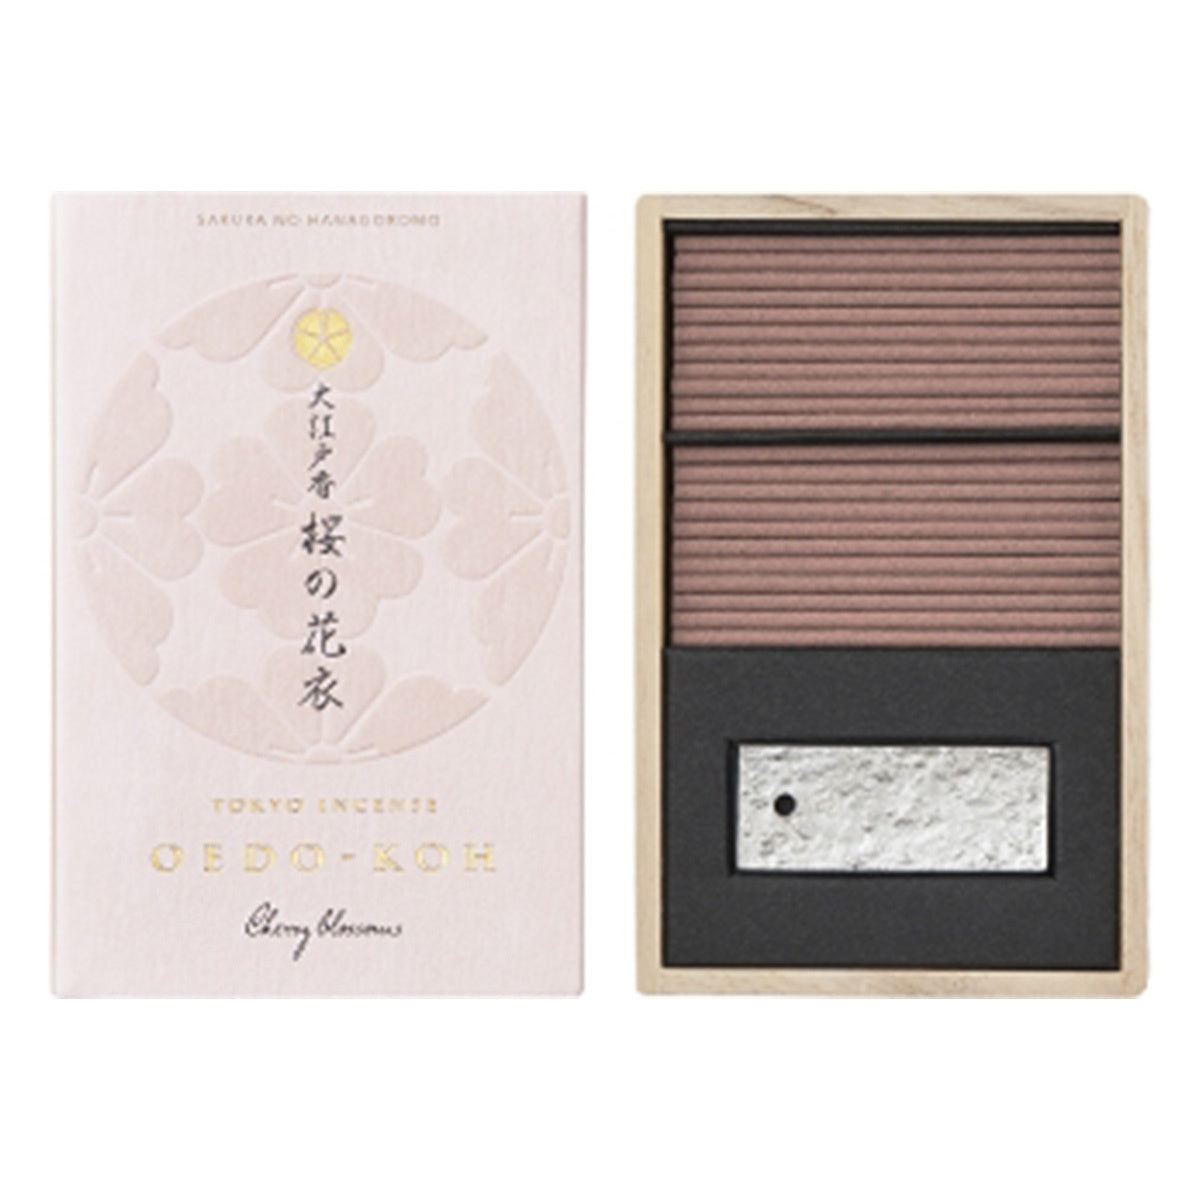 Primary image of Cherry Blossom Tokyo Incense